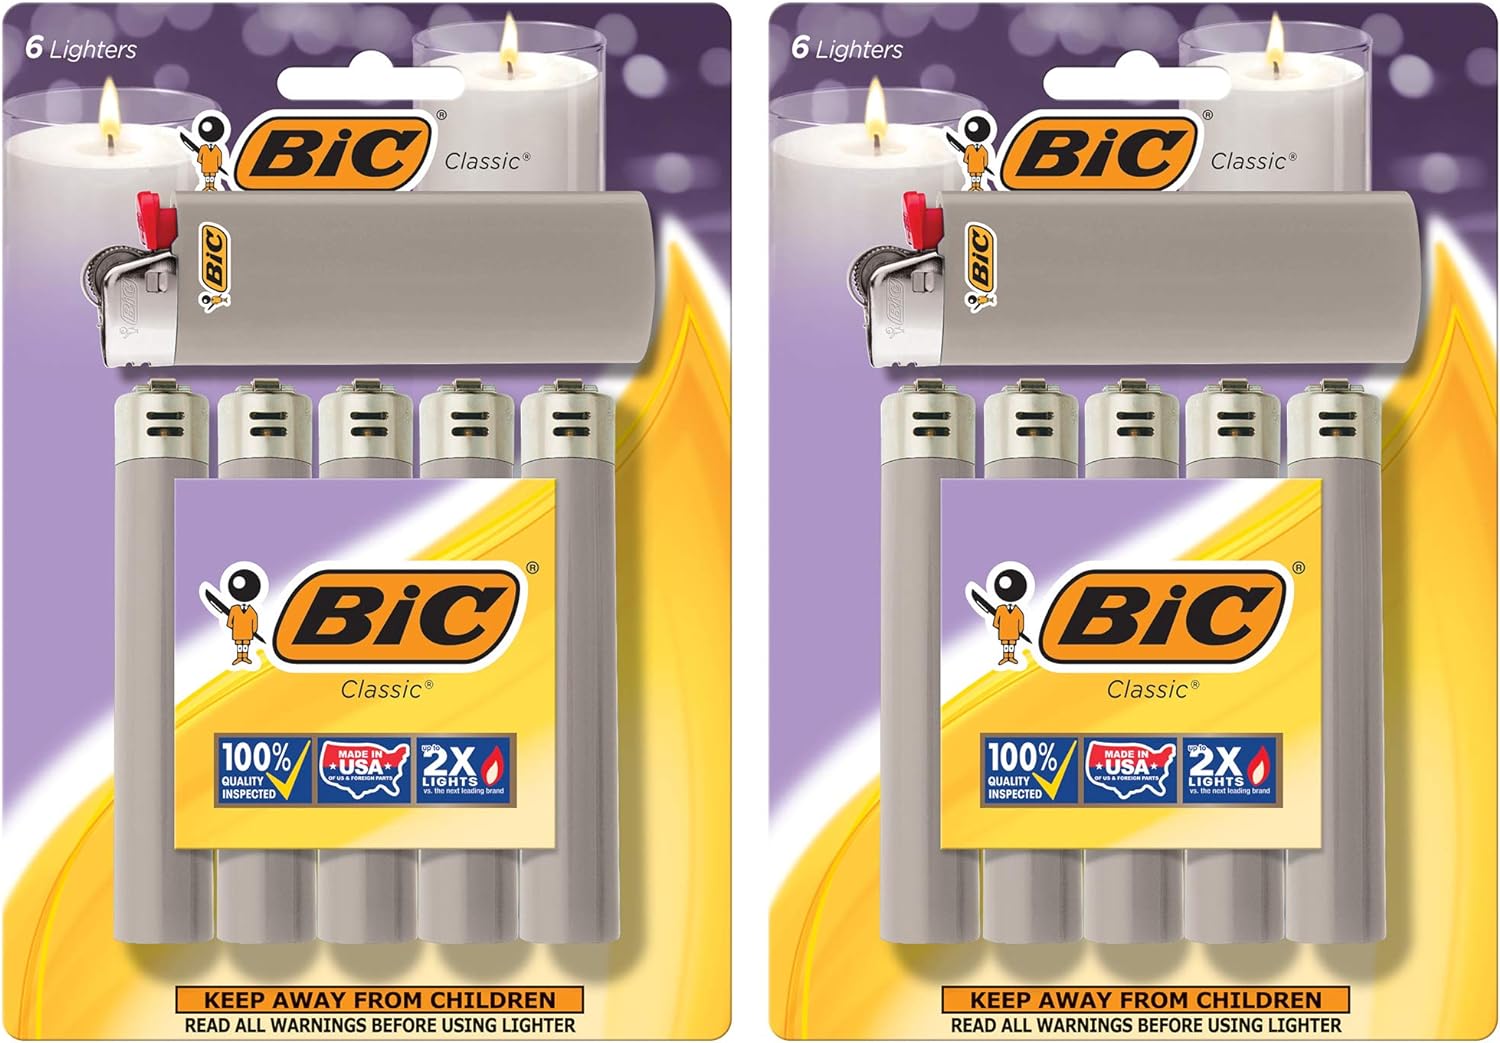 BIC Classic Lighter, Gray, 12-Pack (Packaging May Vary)